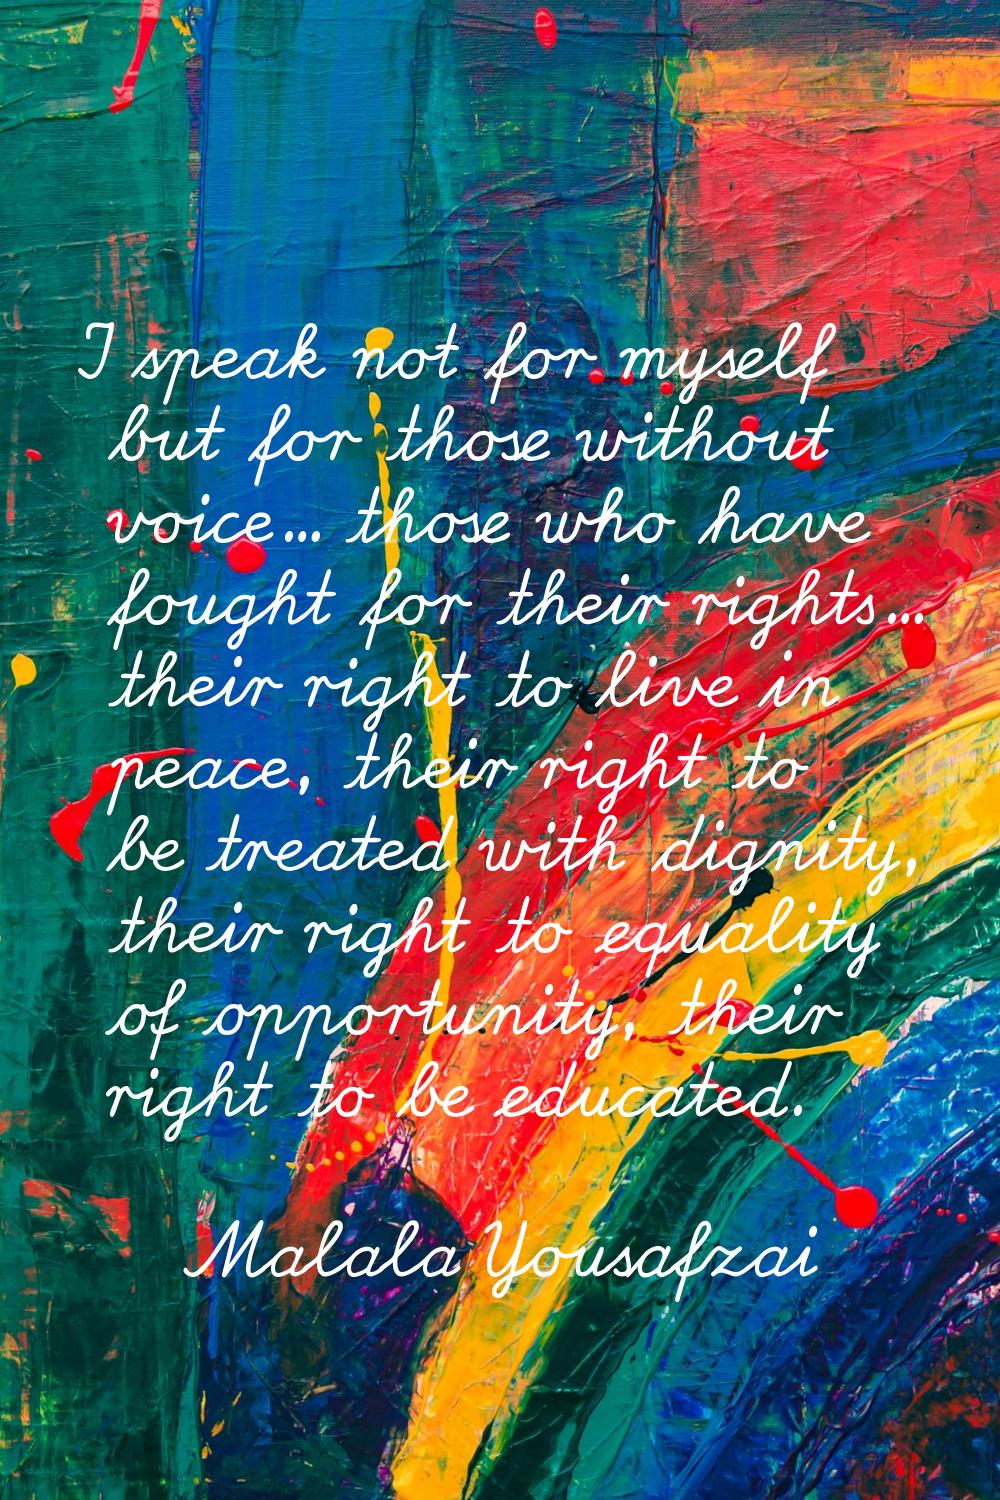 I speak not for myself but for those without voice... those who have fought for their rights... the